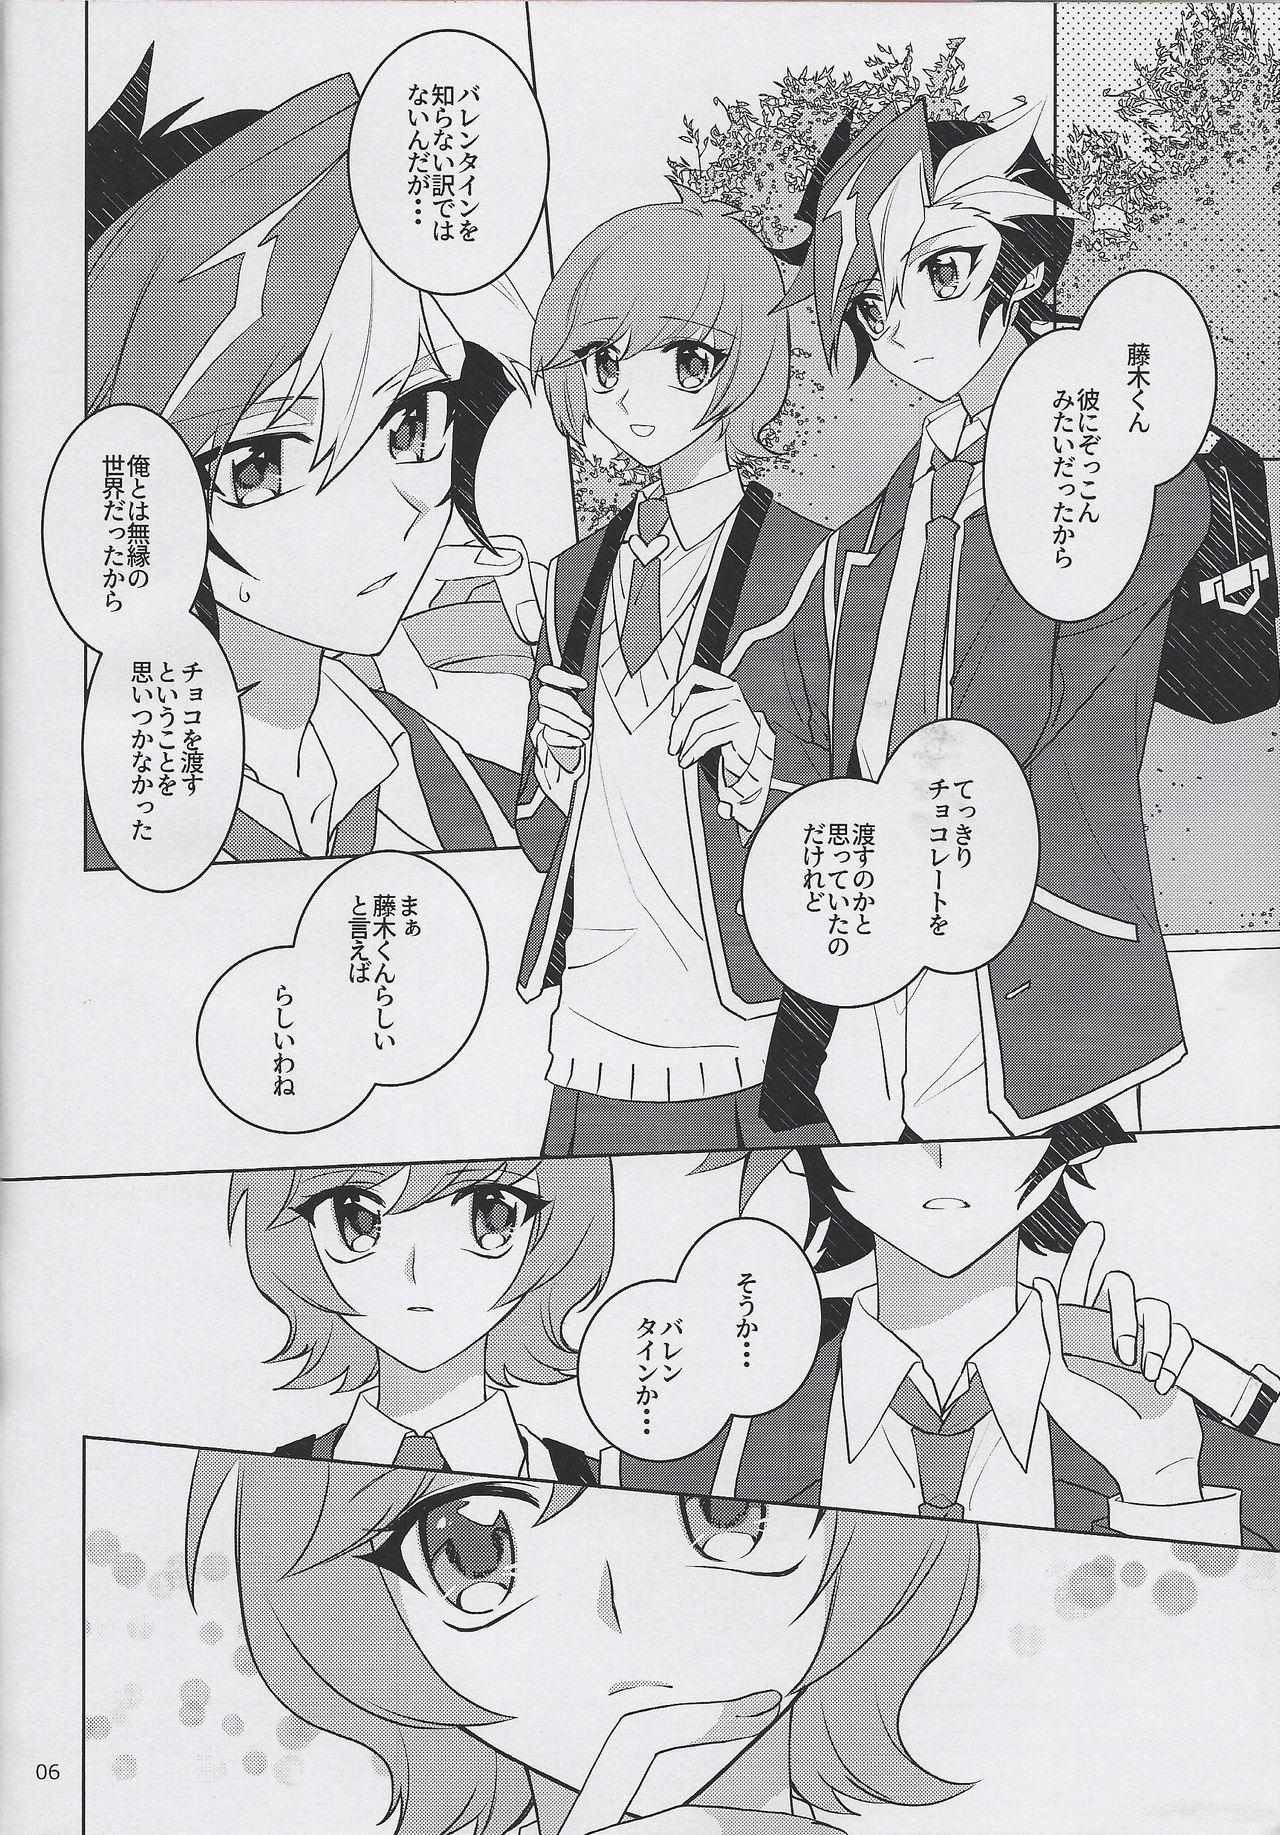 Prostituta Unmei no Melty Choco - Yu gi oh vrains Smooth - Page 5